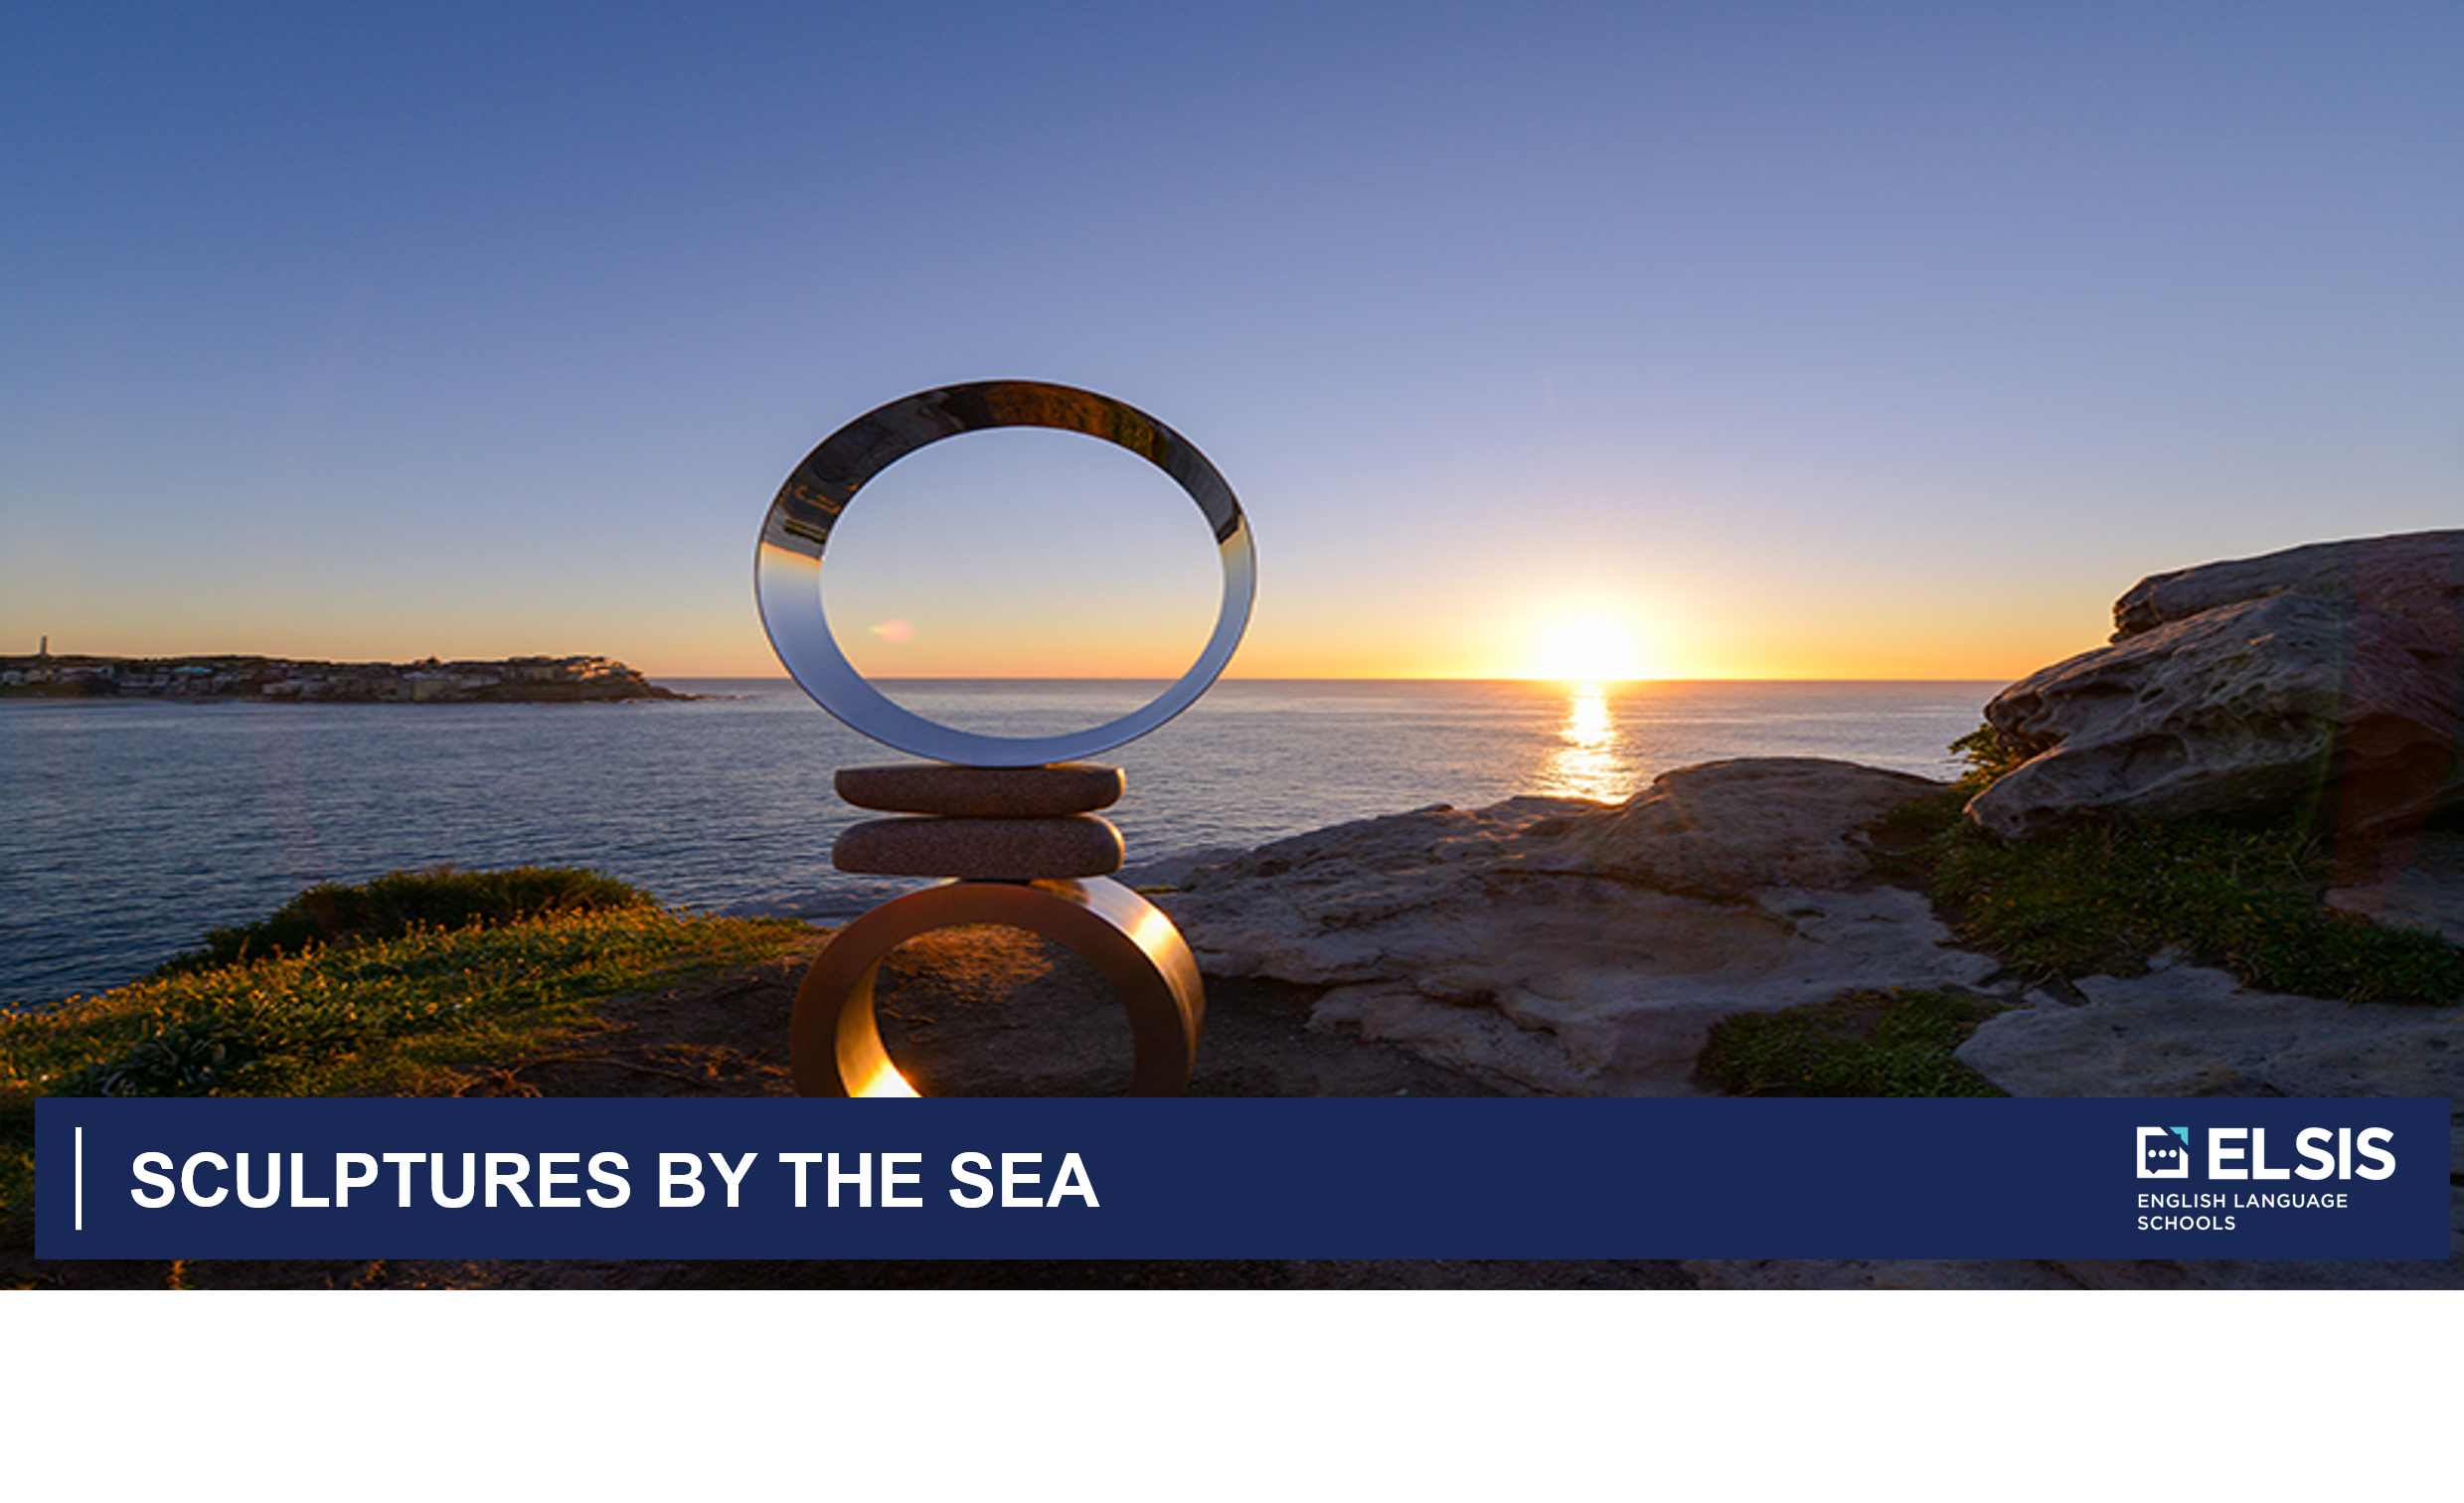 Sculptures by the sea